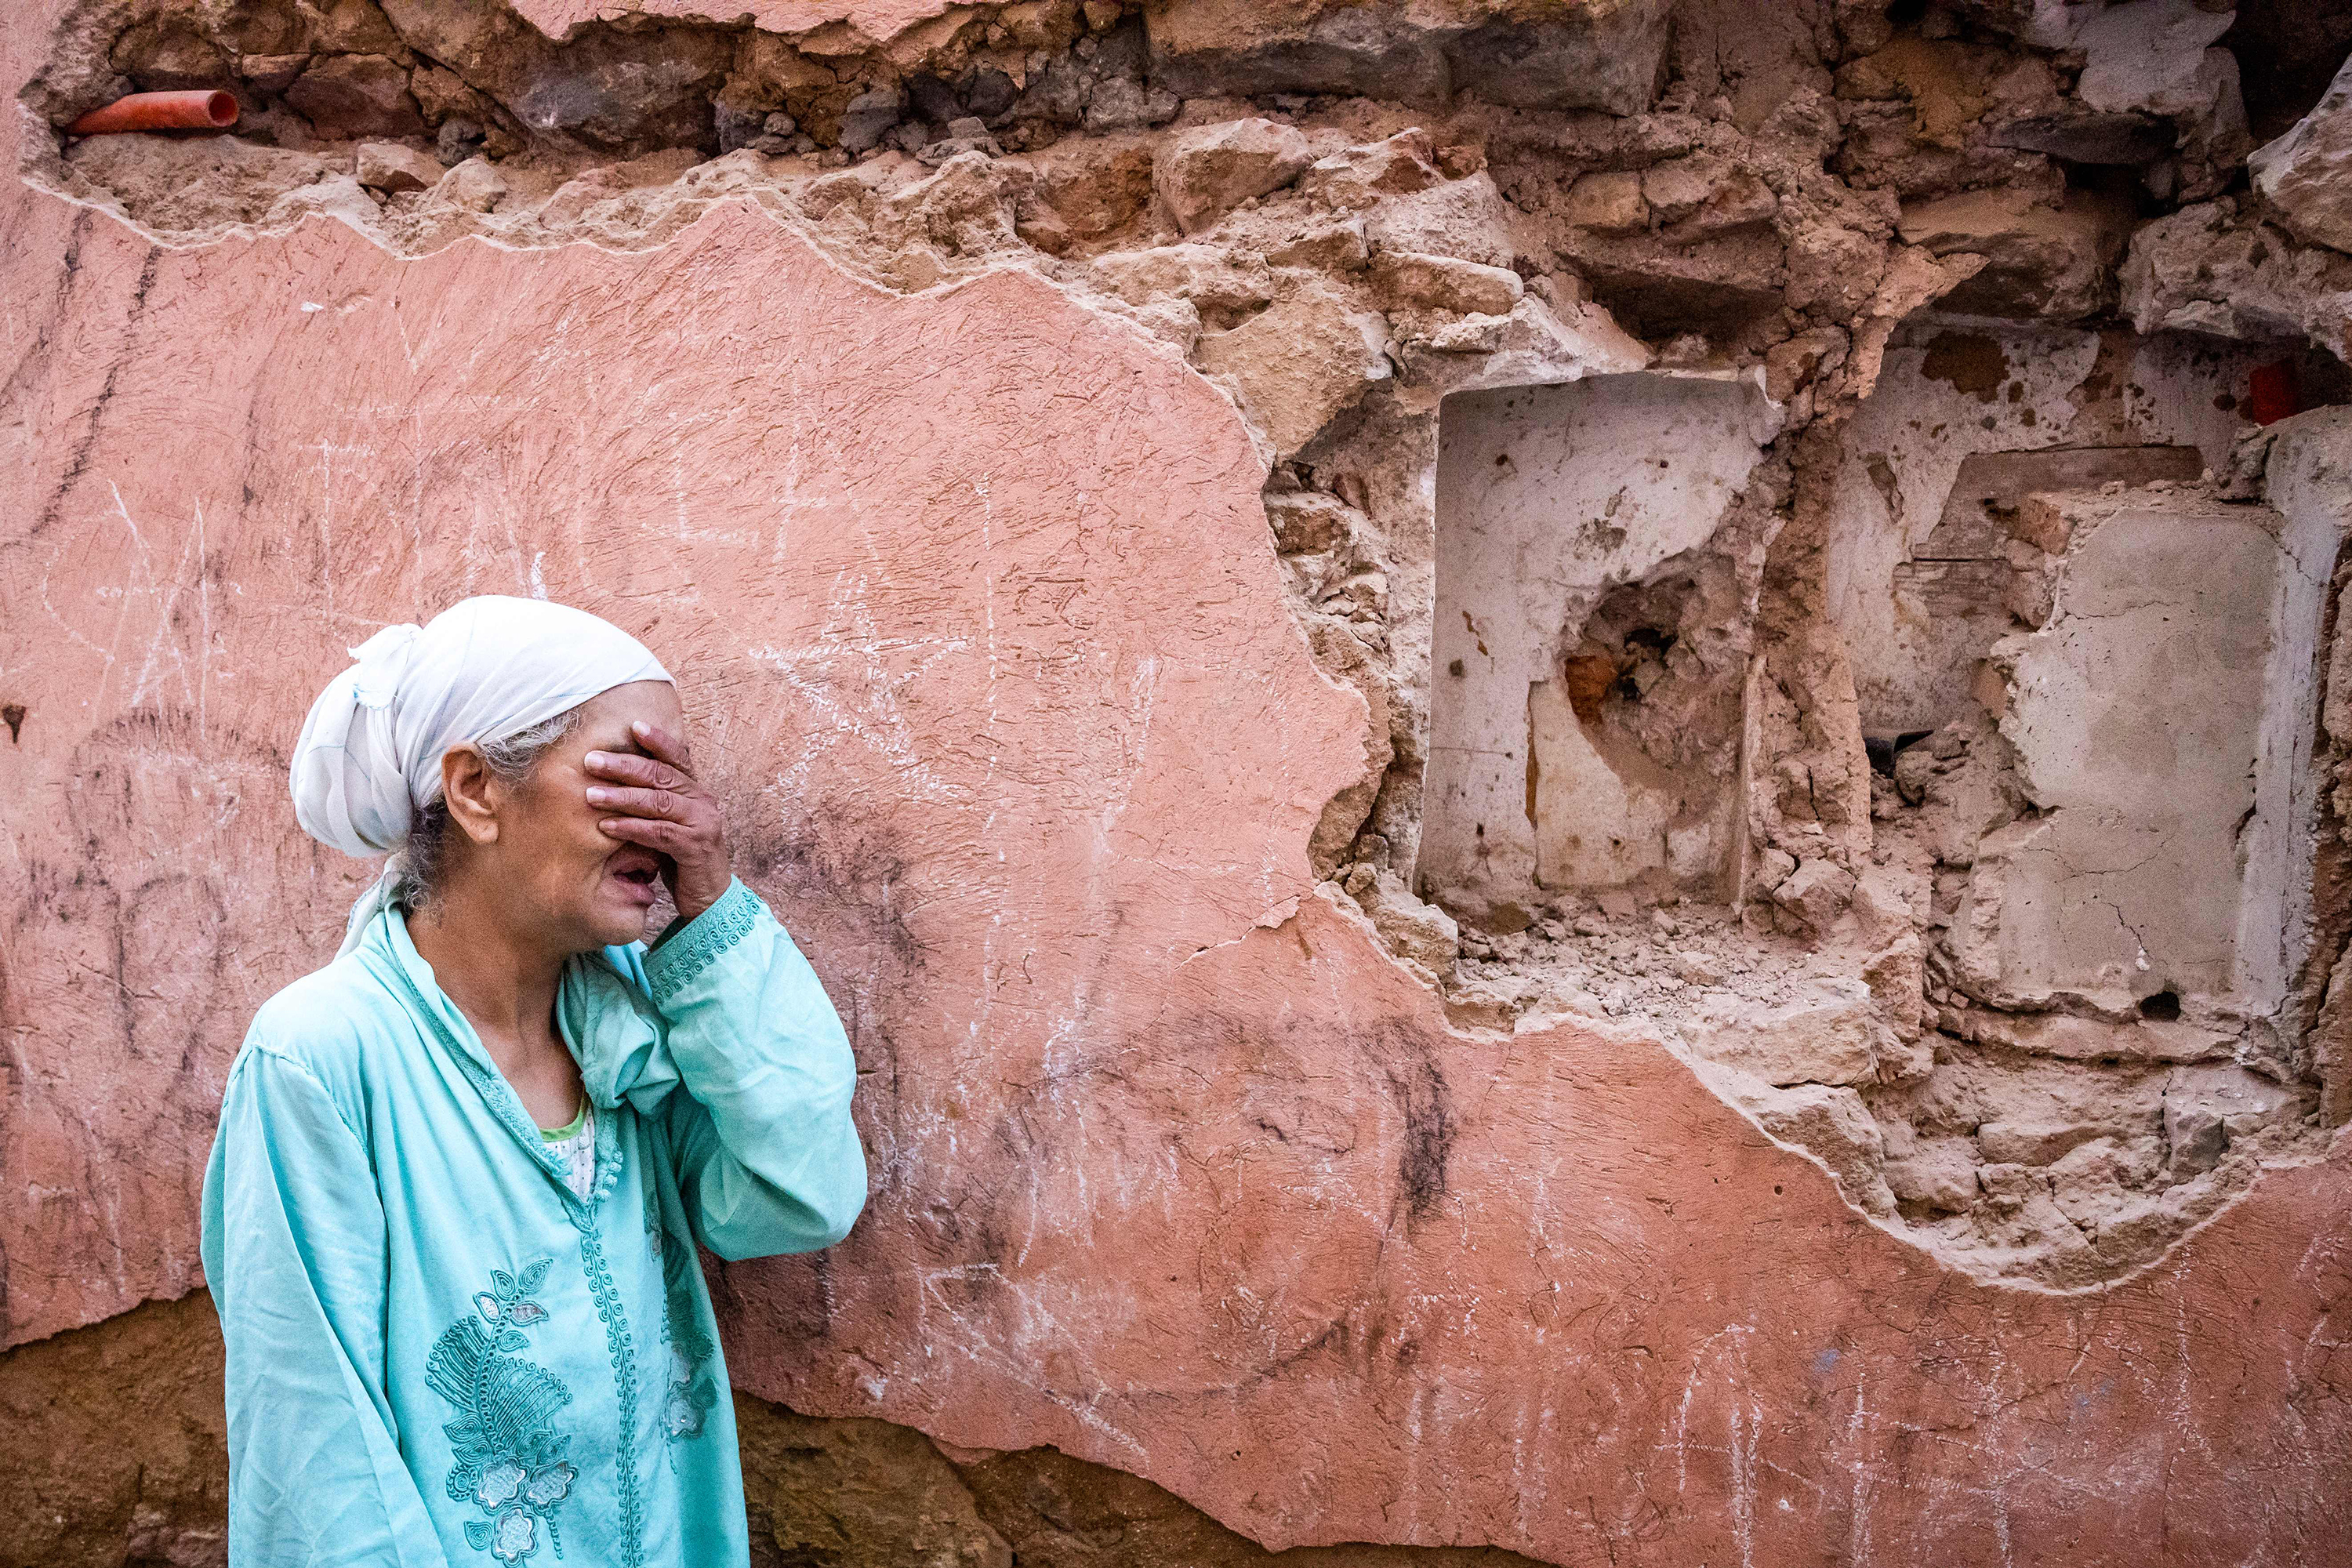 A woman reacts standing in front of her earthquake-damaged house.